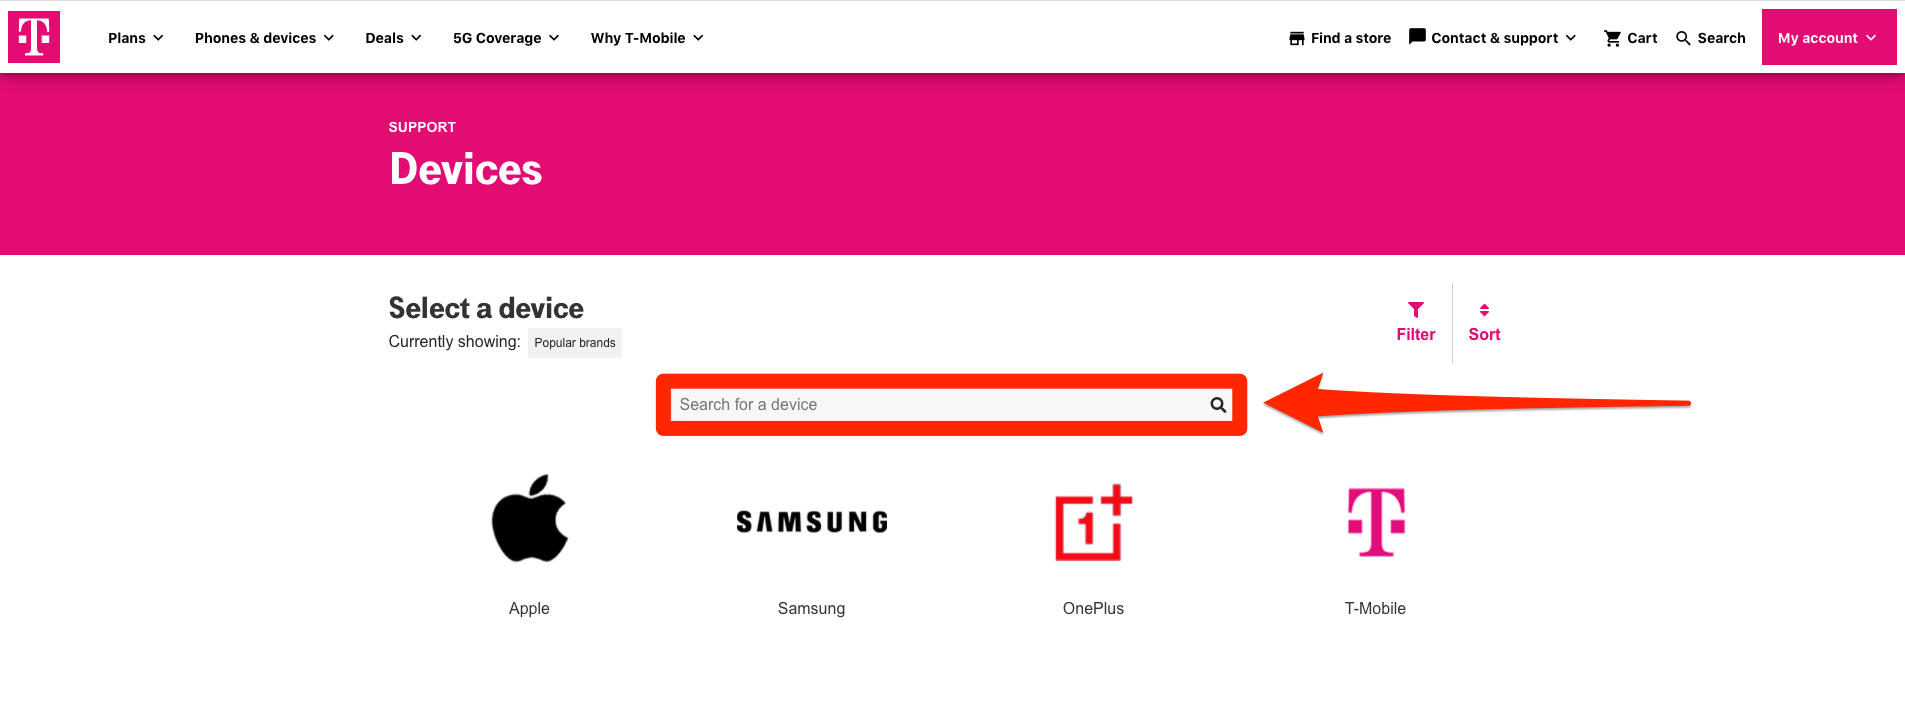 t-mobile phone unlock - search for devices page